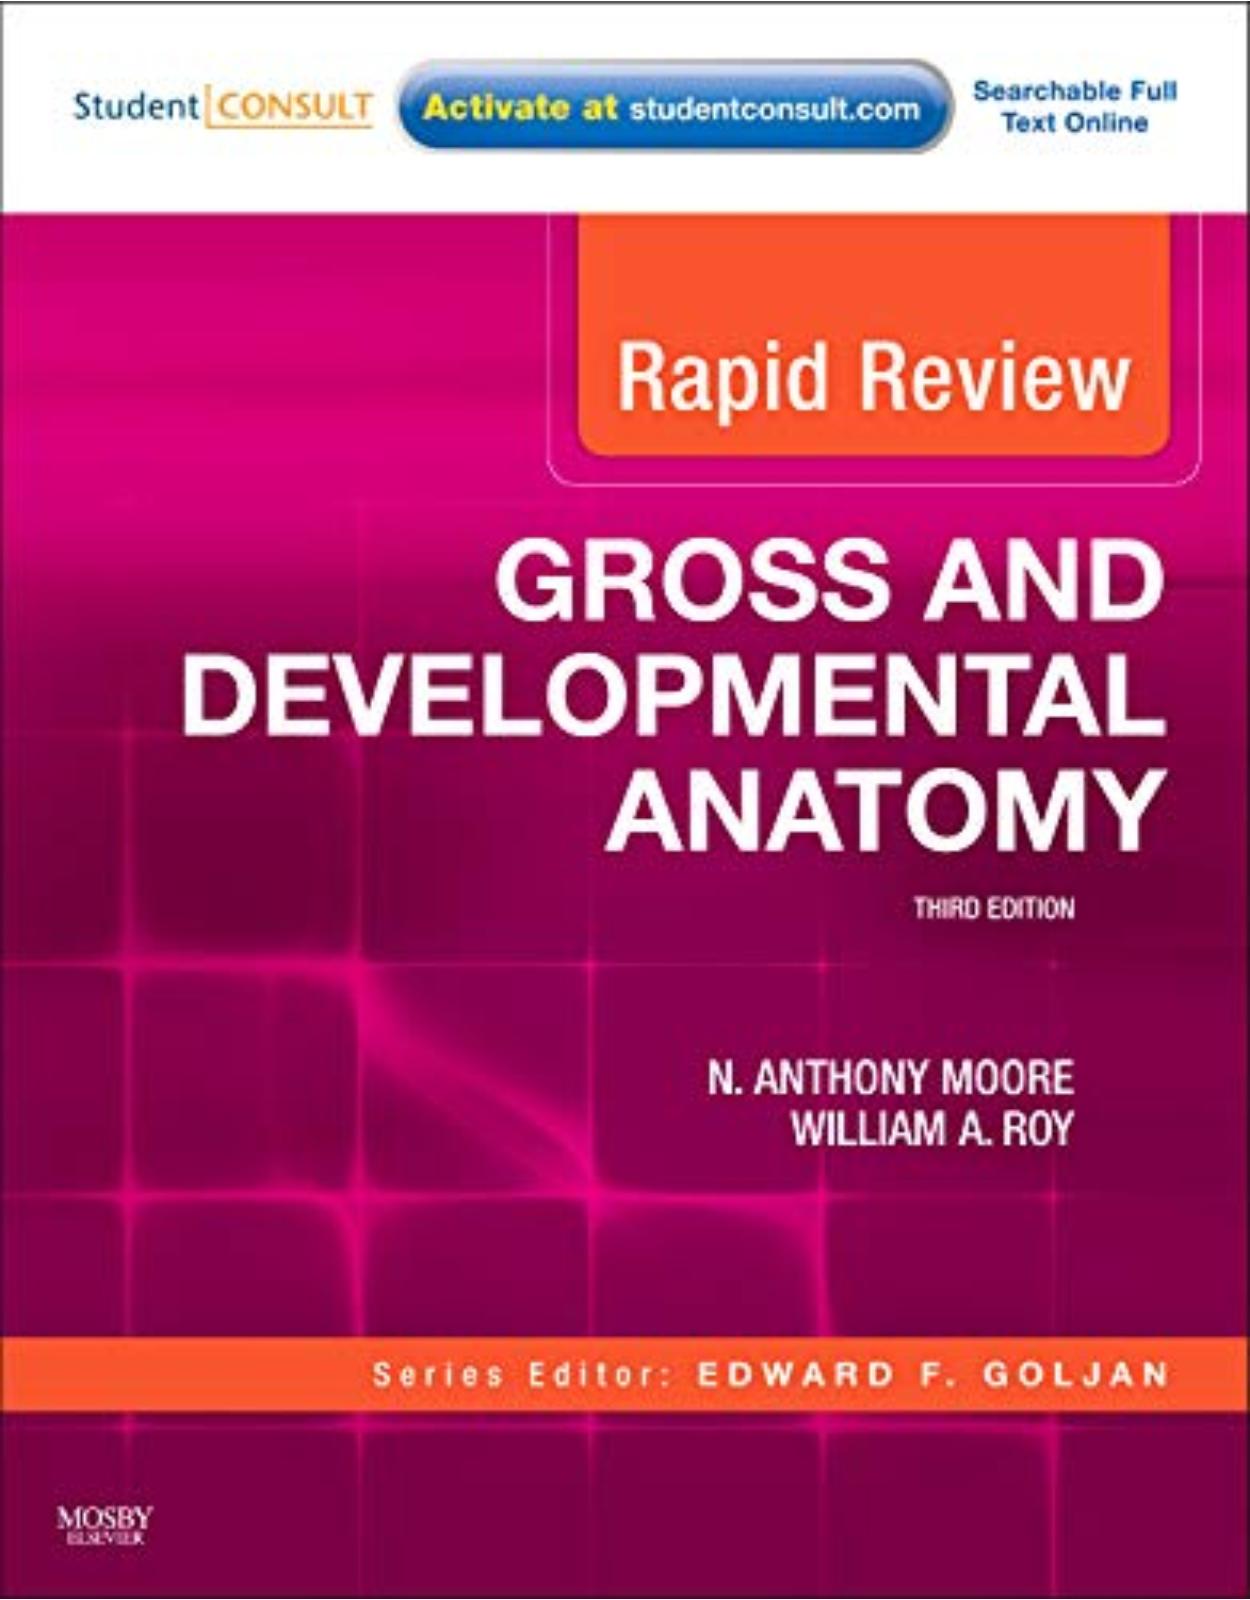 Rapid Review Gross and Developmental Anatomy, With STUDENT CONSULT Online Access, 3rd Edition